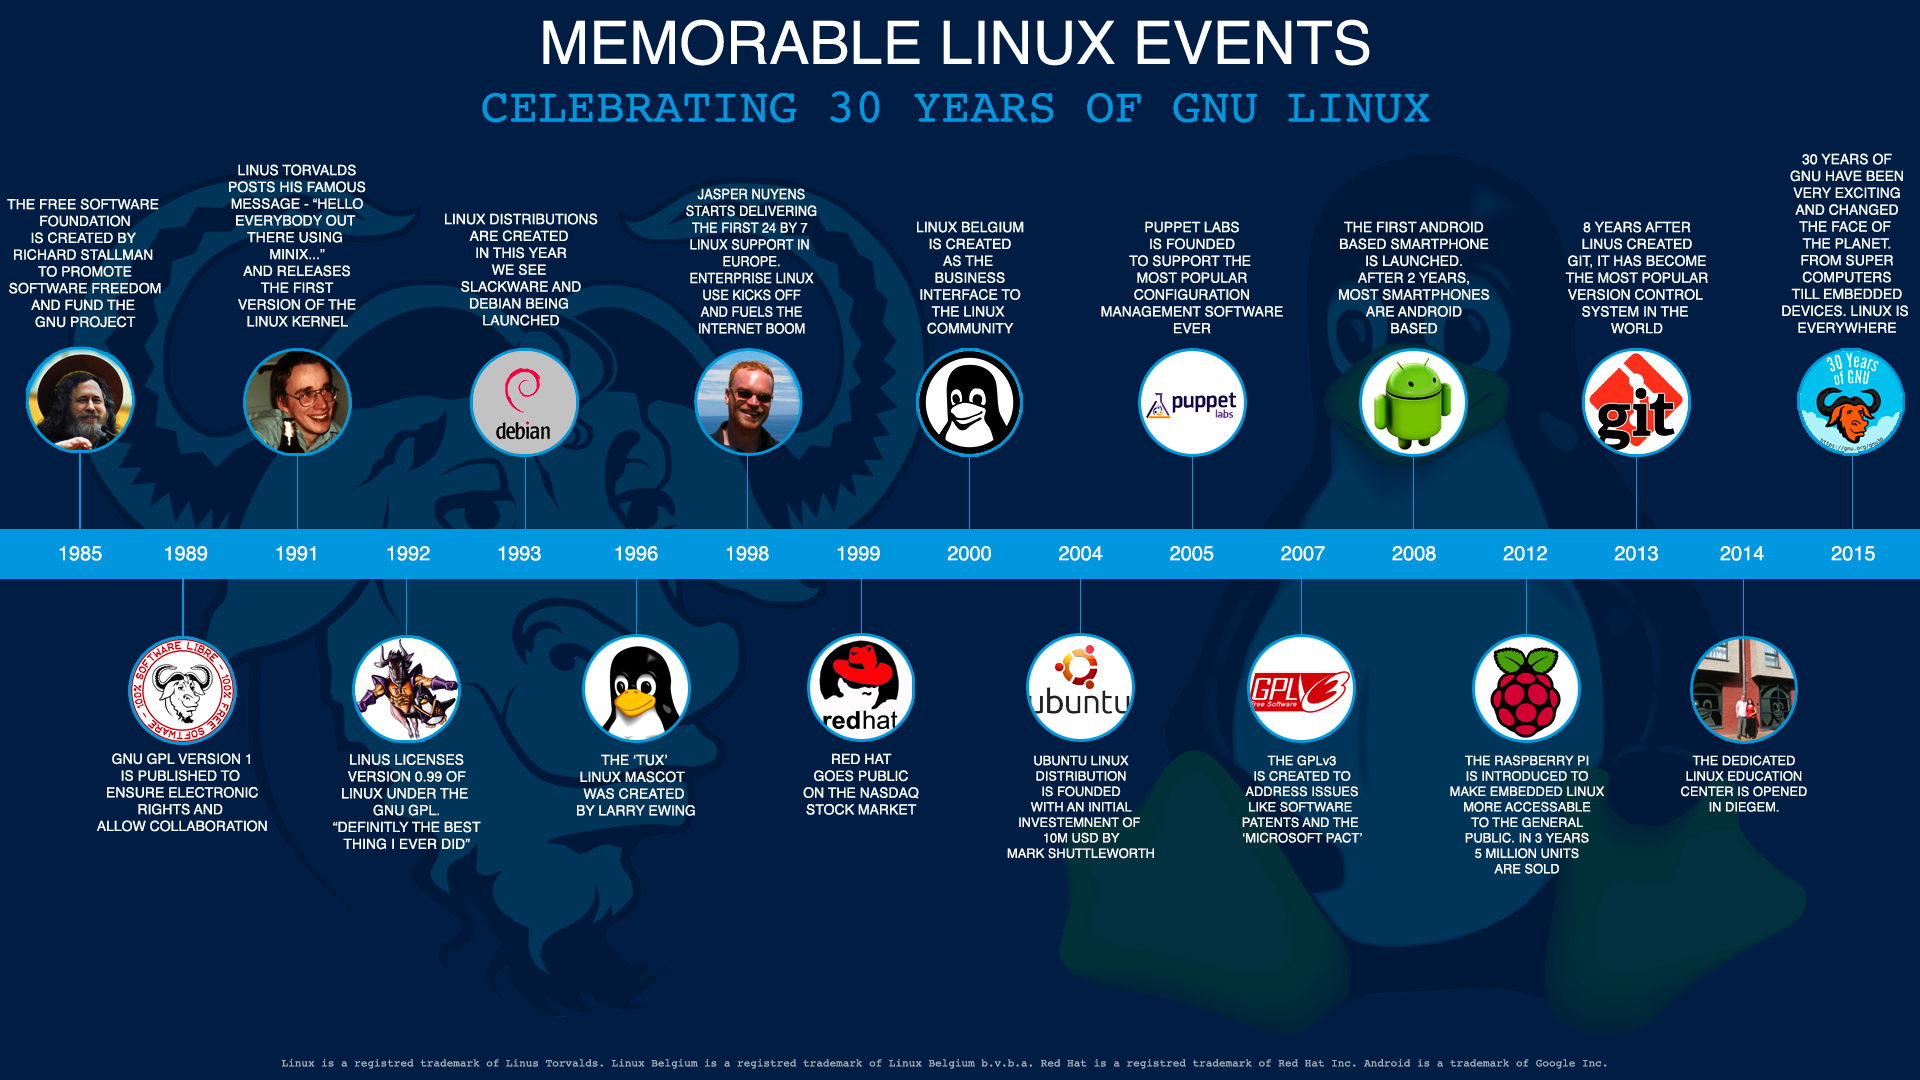 Celebrating 30 Years and Counting of GNU-Linux